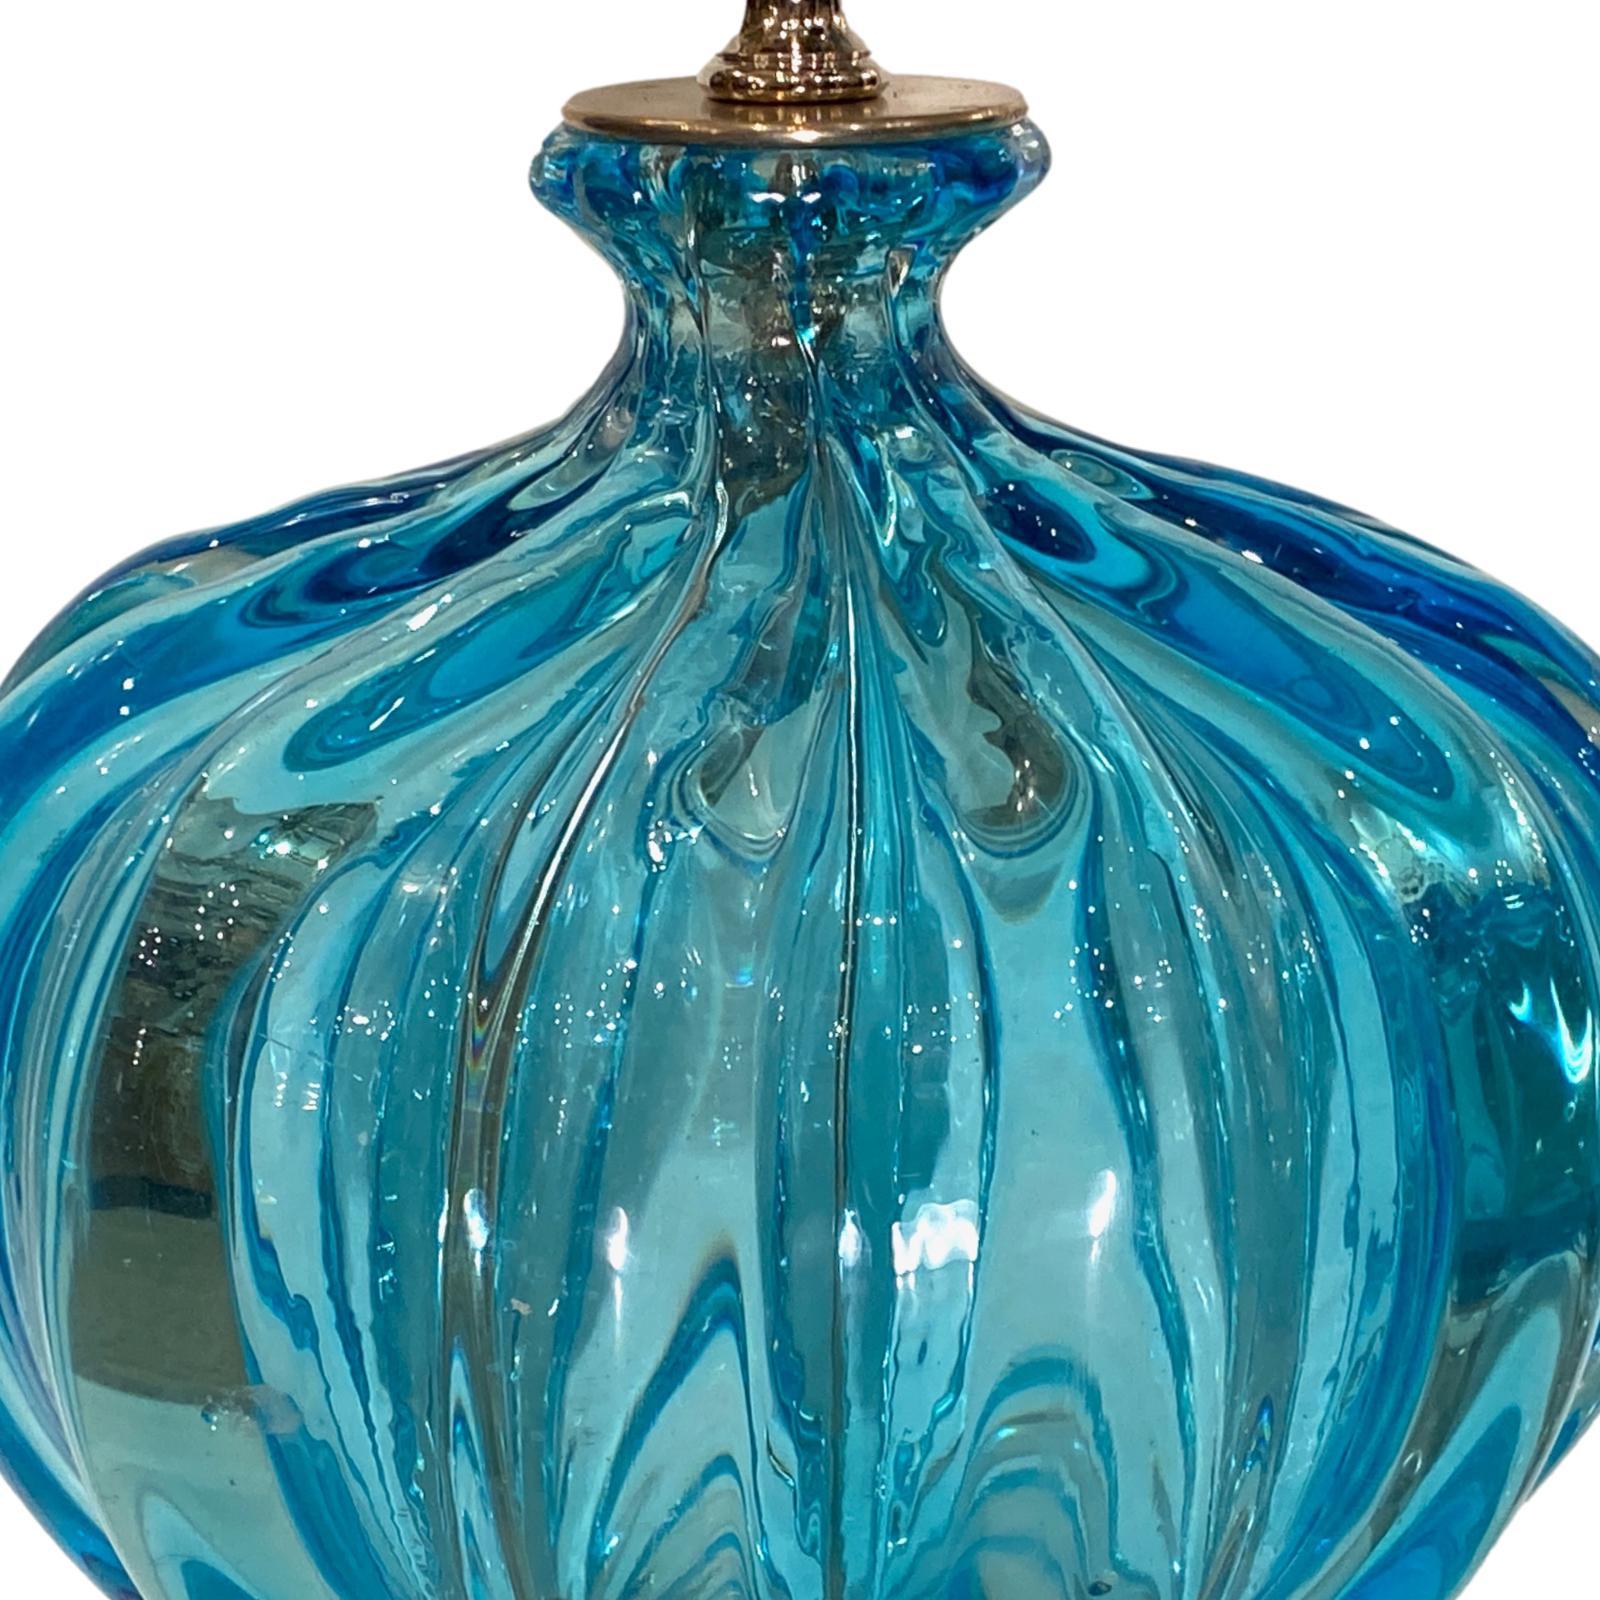 A pair of circa 1930's blue glass Murano lamps with etched glass and nickel-plated bases.

Measurements:
Height of body: 14